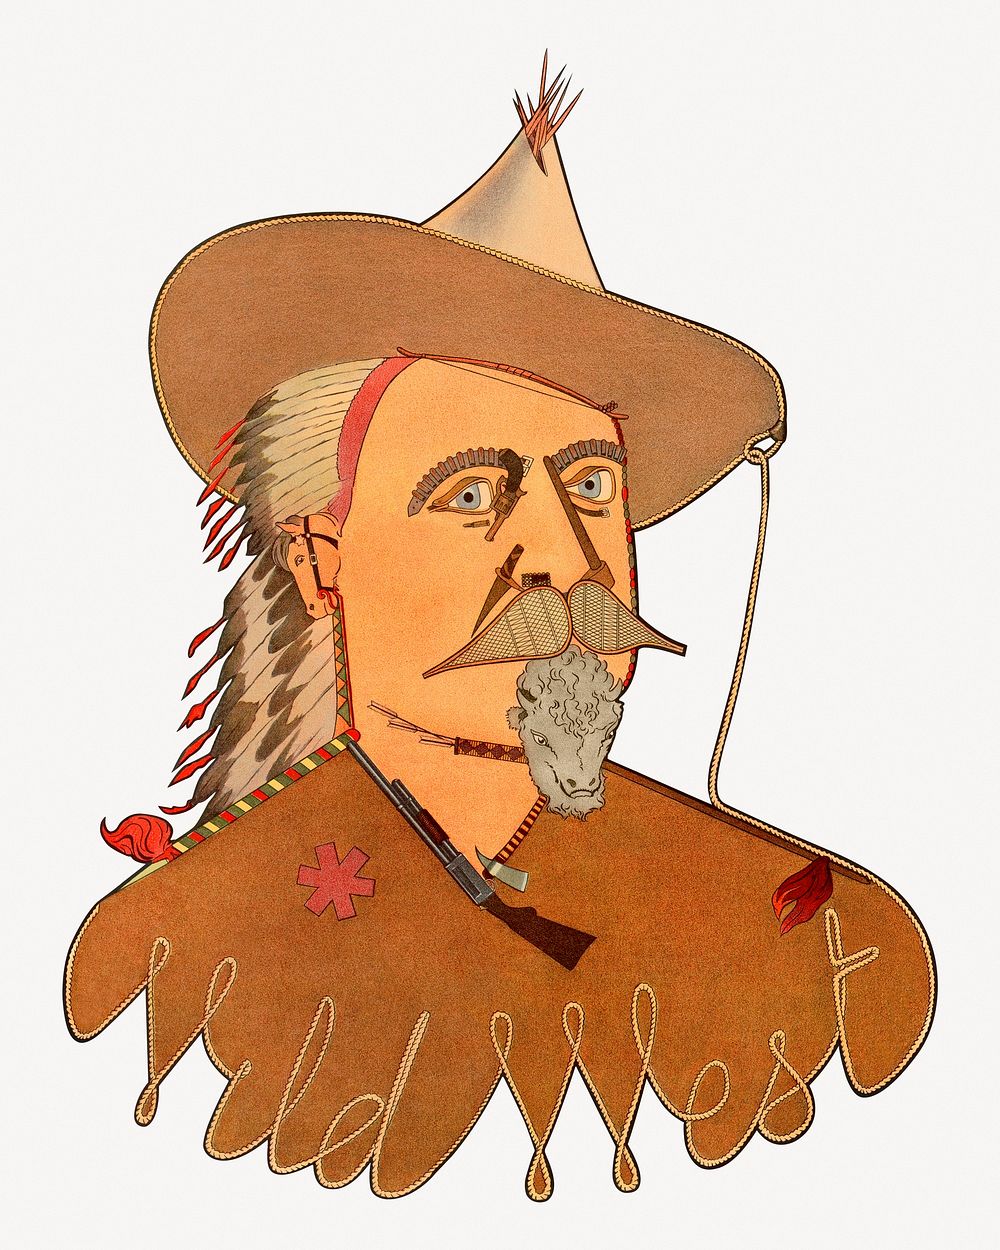 Wild Western mustache man illustration psd.  Remastered by rawpixel